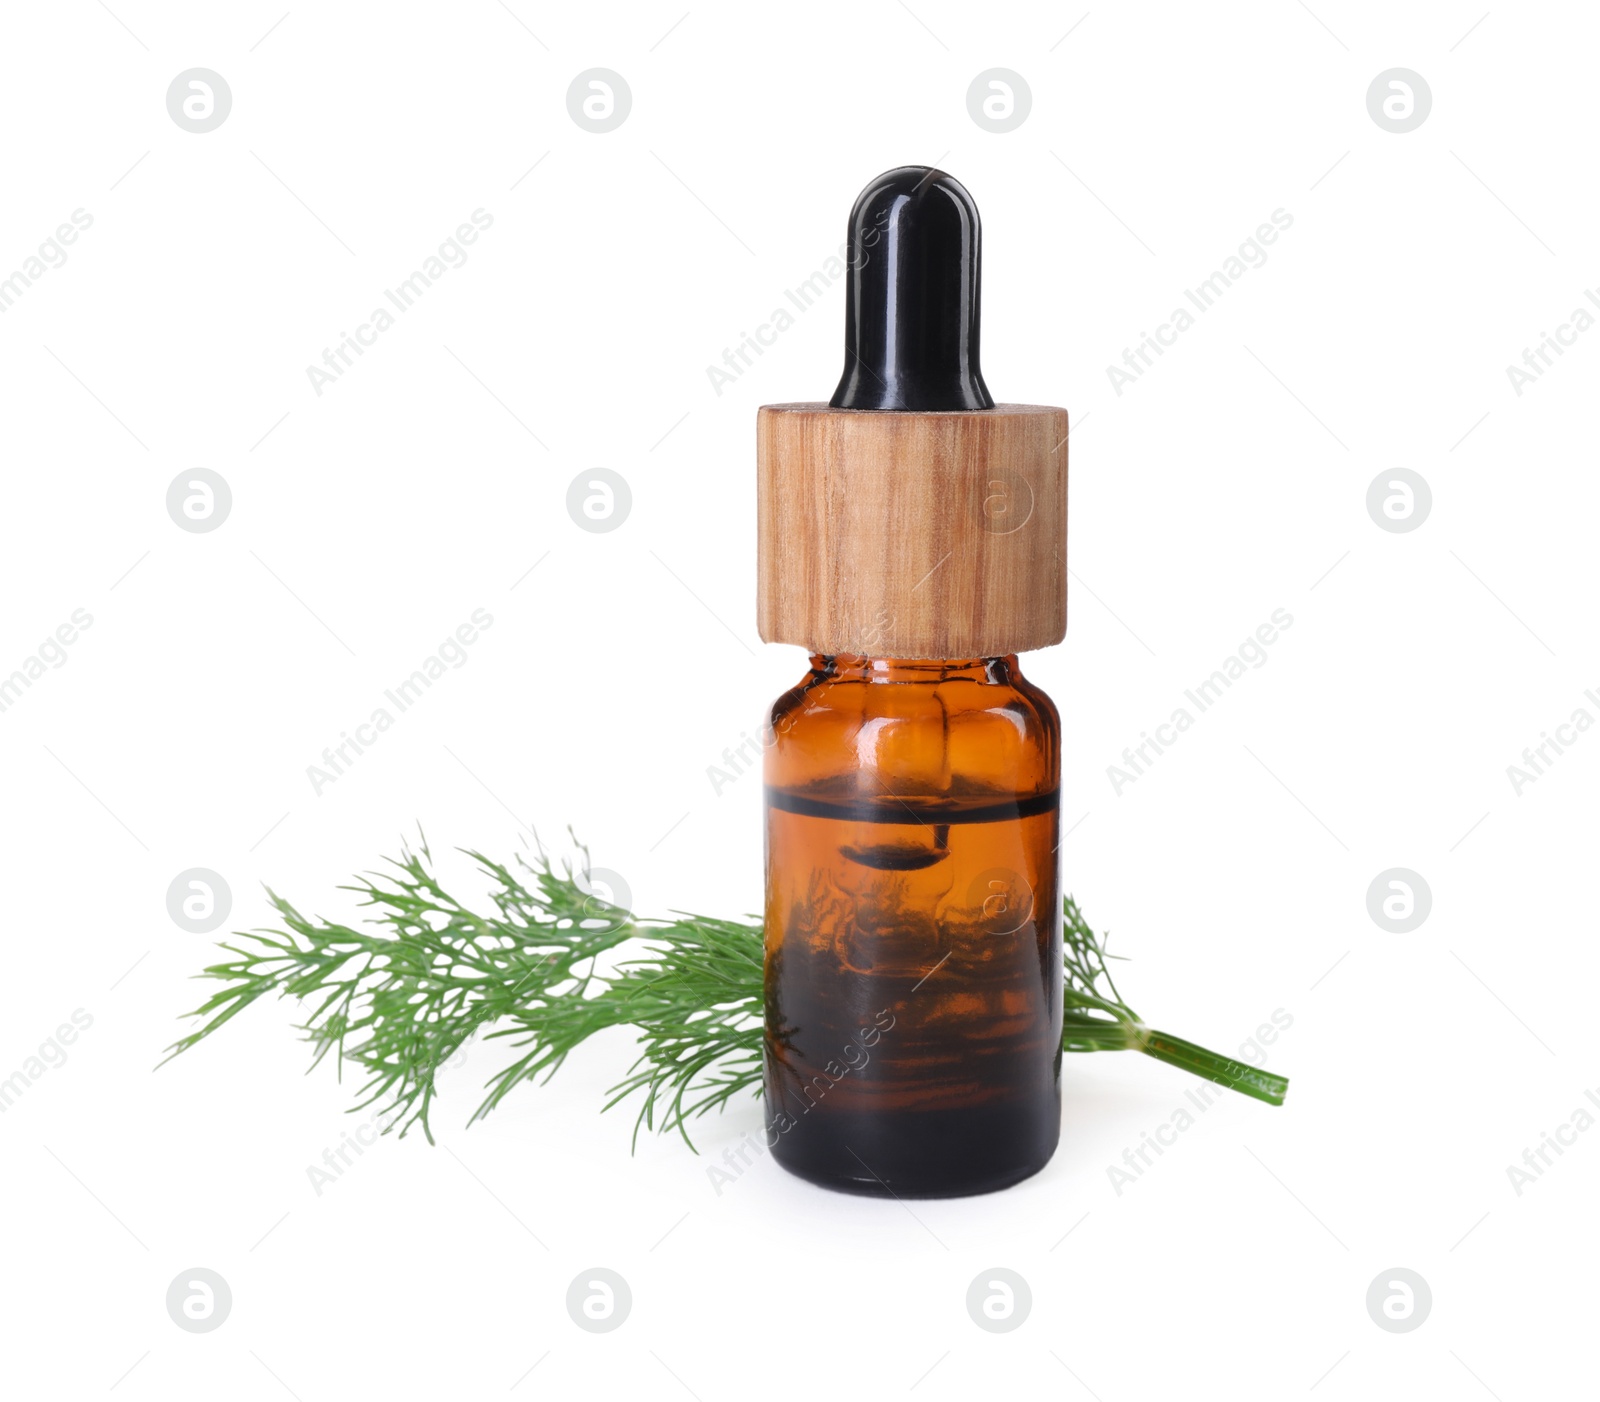 Photo of Bottle of essential oil and fresh dill isolated on white